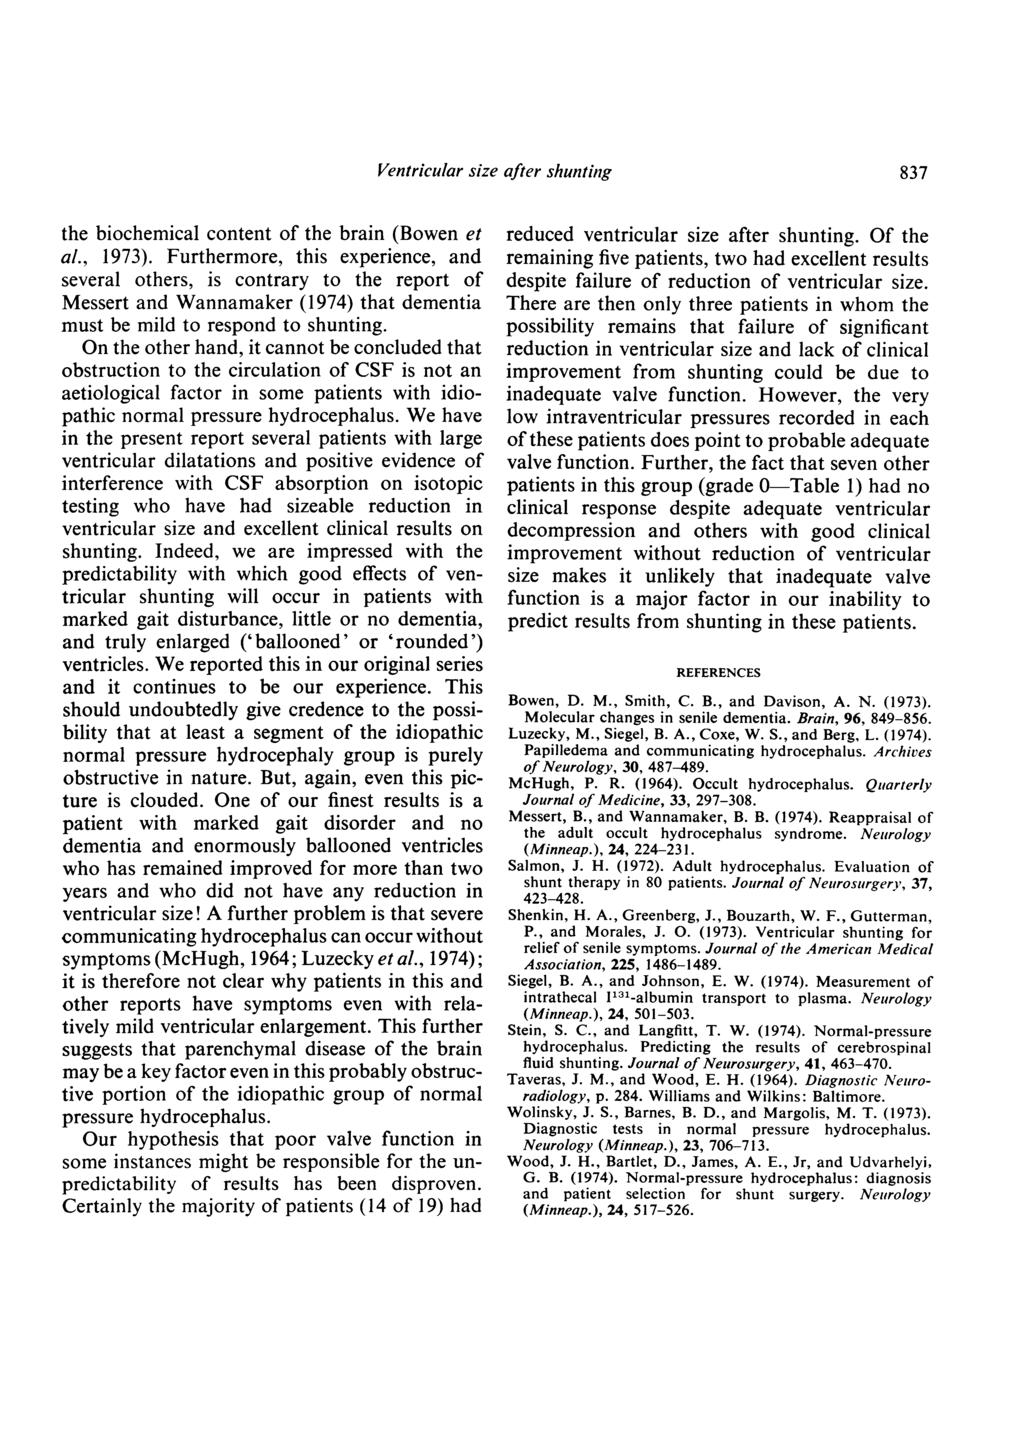 Ventricular size after shunting the biochemical content of the brain (Bowen et al., 1973).